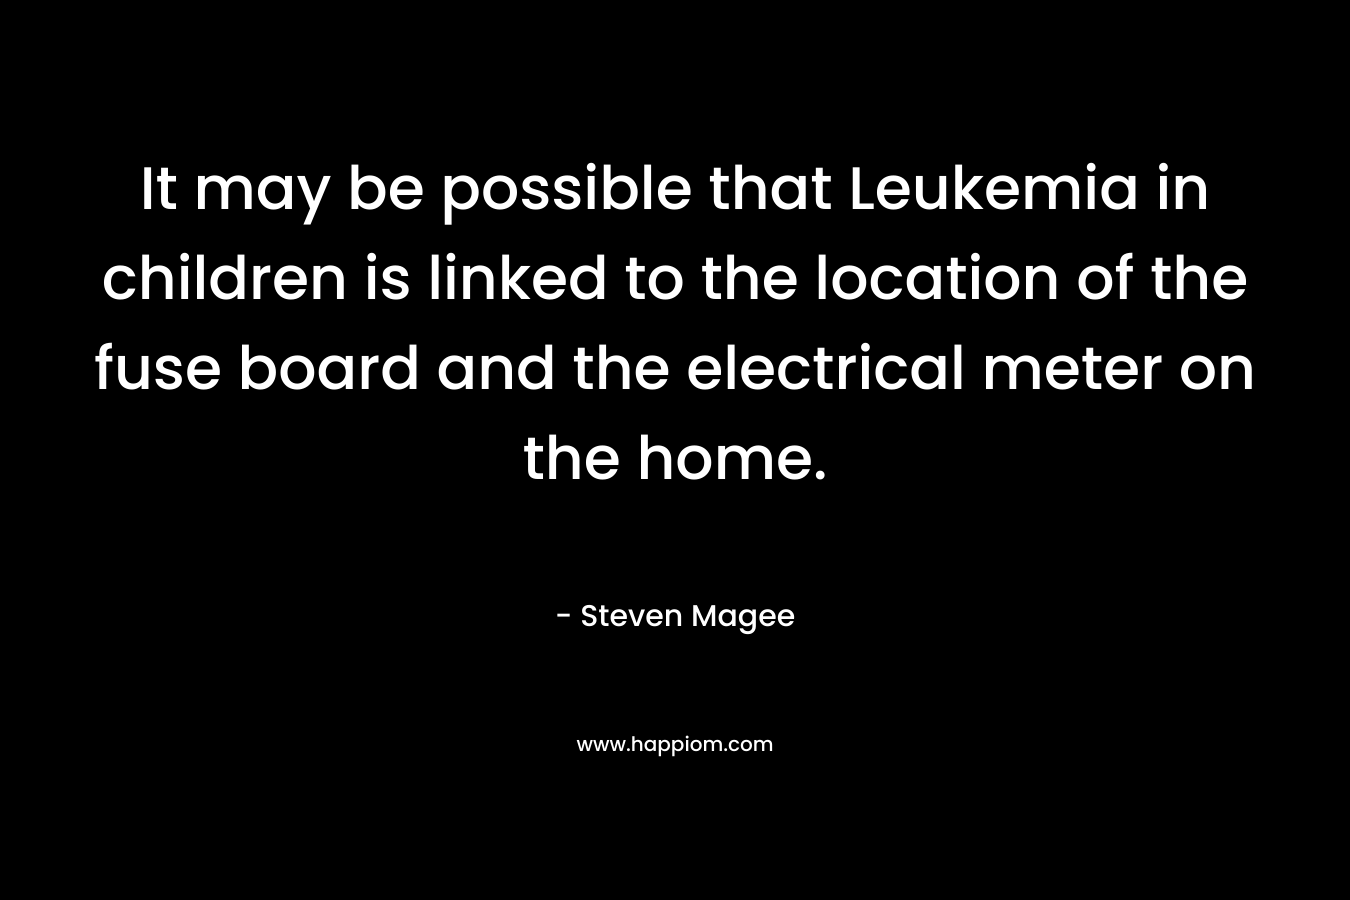 It may be possible that Leukemia in children is linked to the location of the fuse board and the electrical meter on the home.